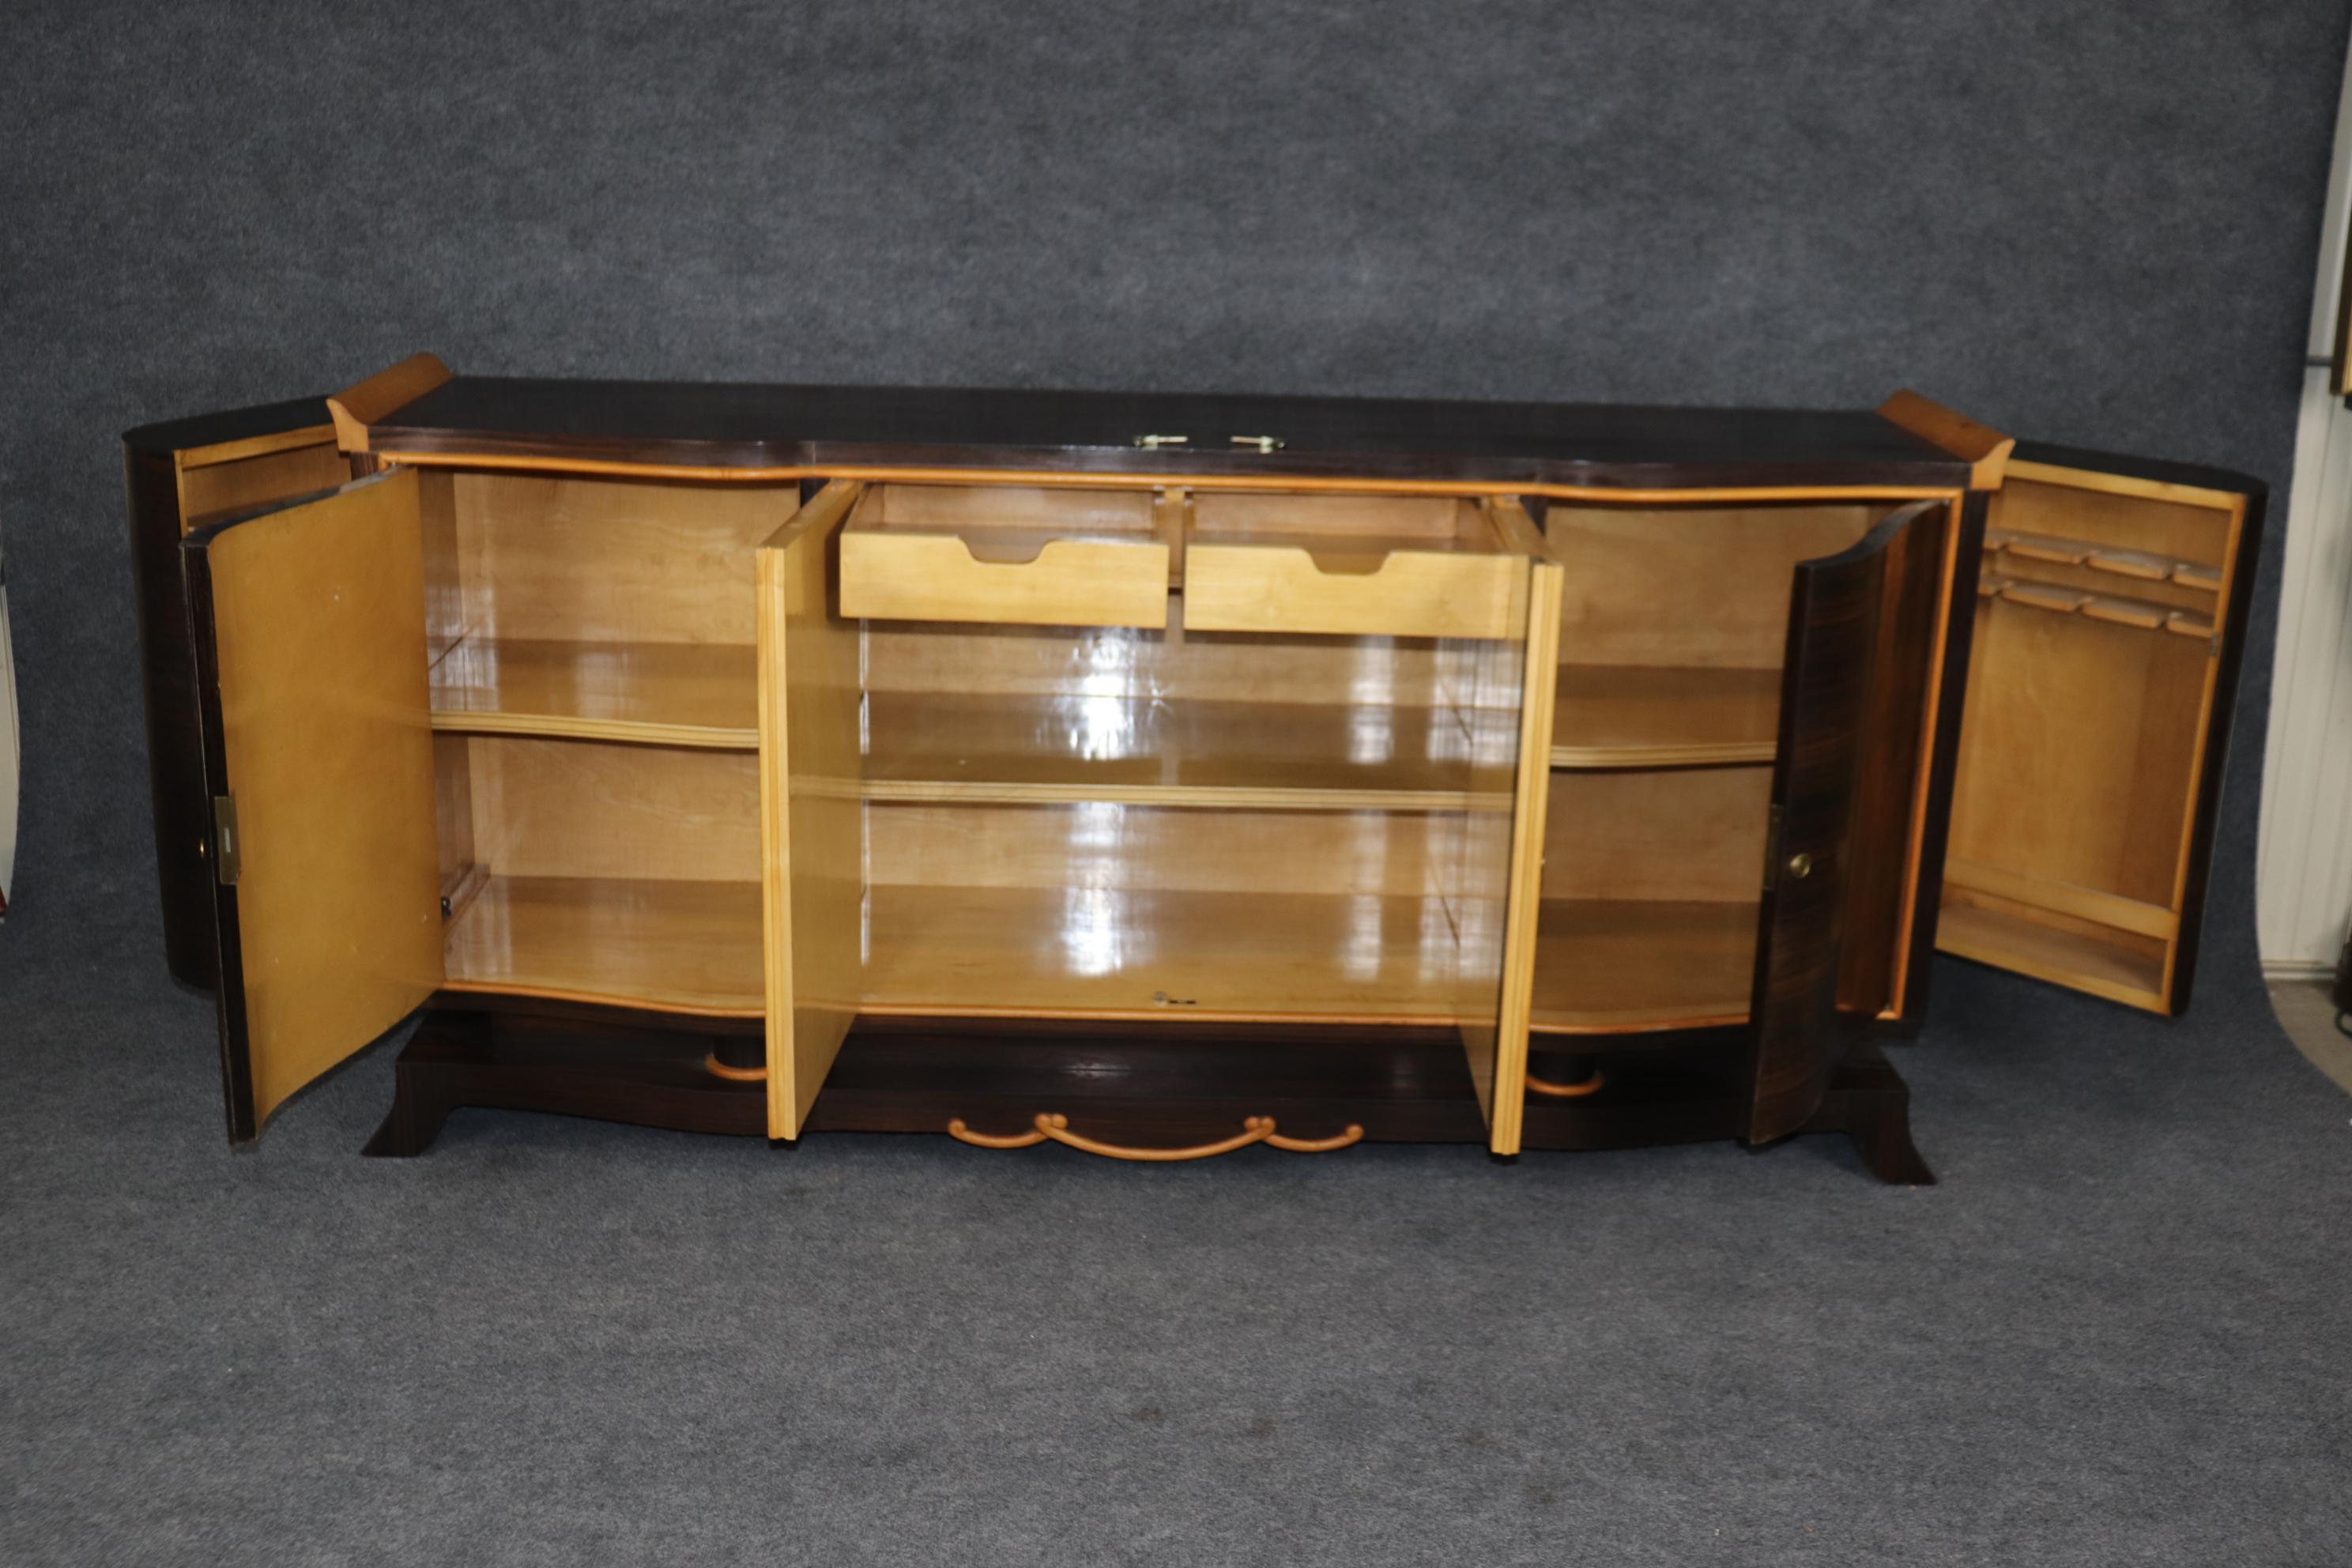 This is a superb French Art Deco sideboard with bar cabinet side doors and gorgeous sumptuous Macassar ebony wood on the outside of the case and incredible satinwood and high polished interior. The doors each have small bar cabinets built-in for